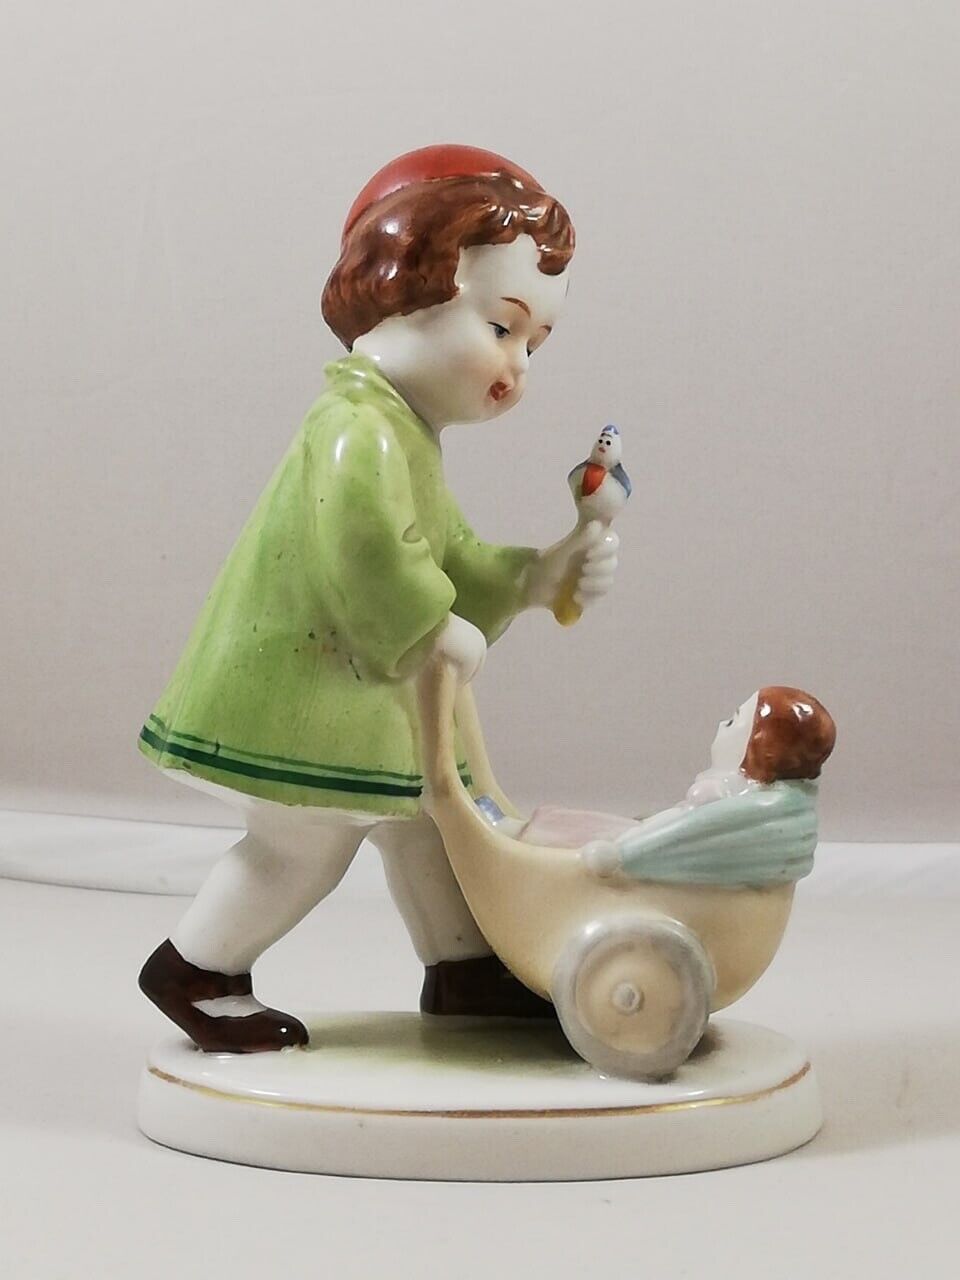 RARE Figurine “GIRL PLAYS WITH DOLL” Scheibe-Alsbach 1920s Germany Porcelain